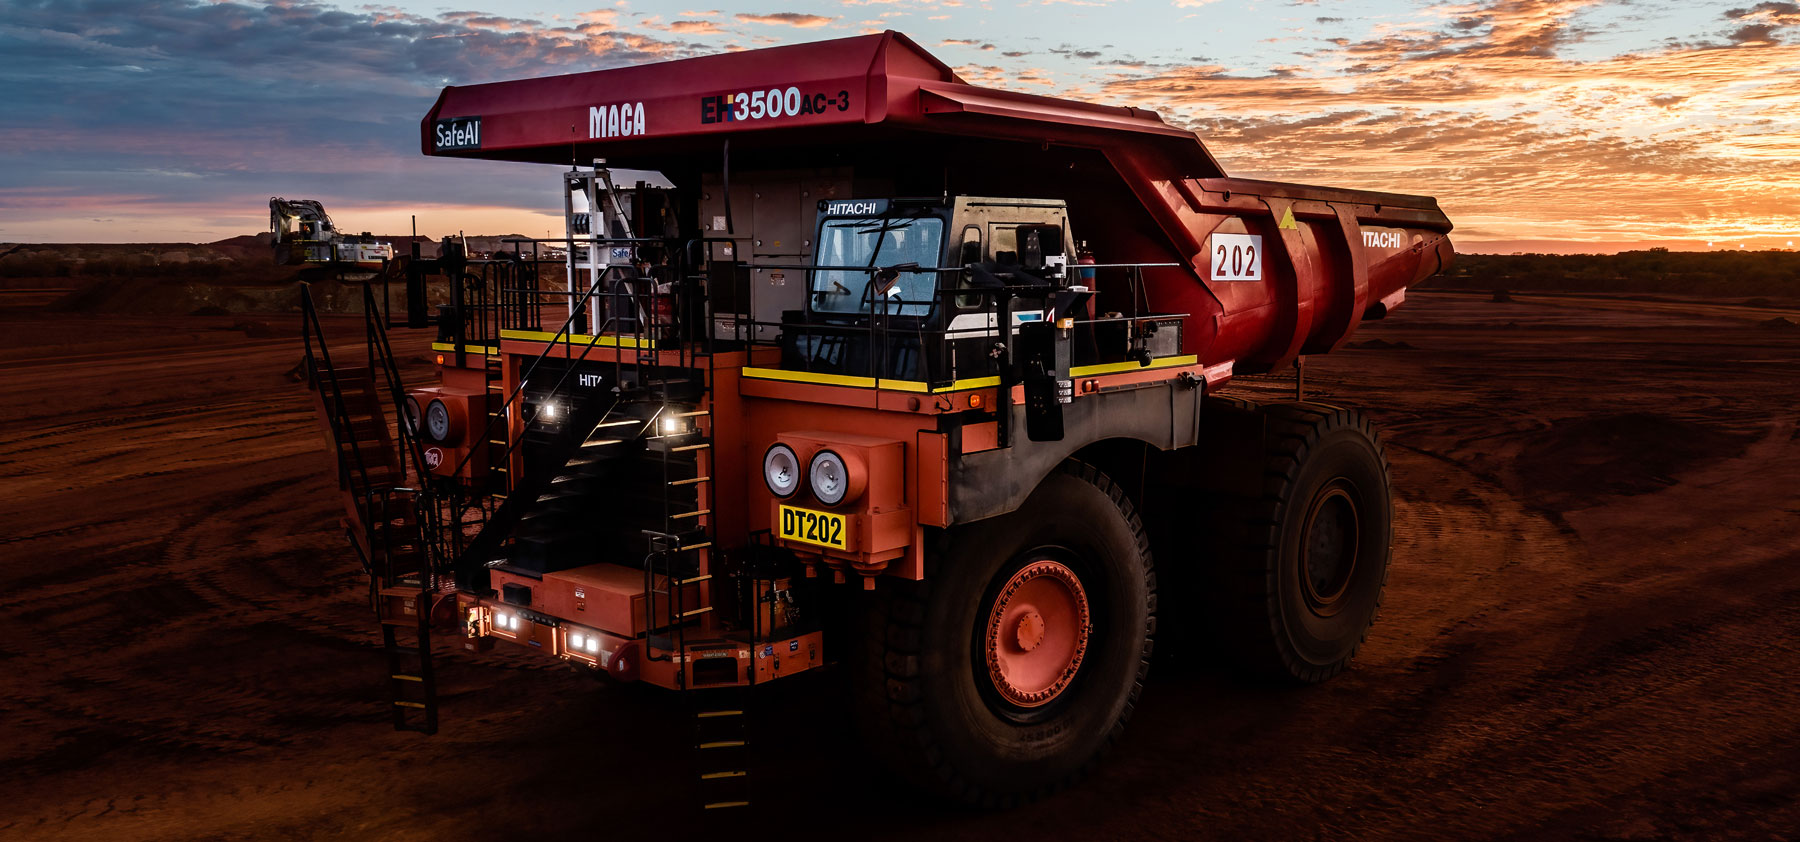 Position Partners announces agreement to automate 100 mining trucks with MACA